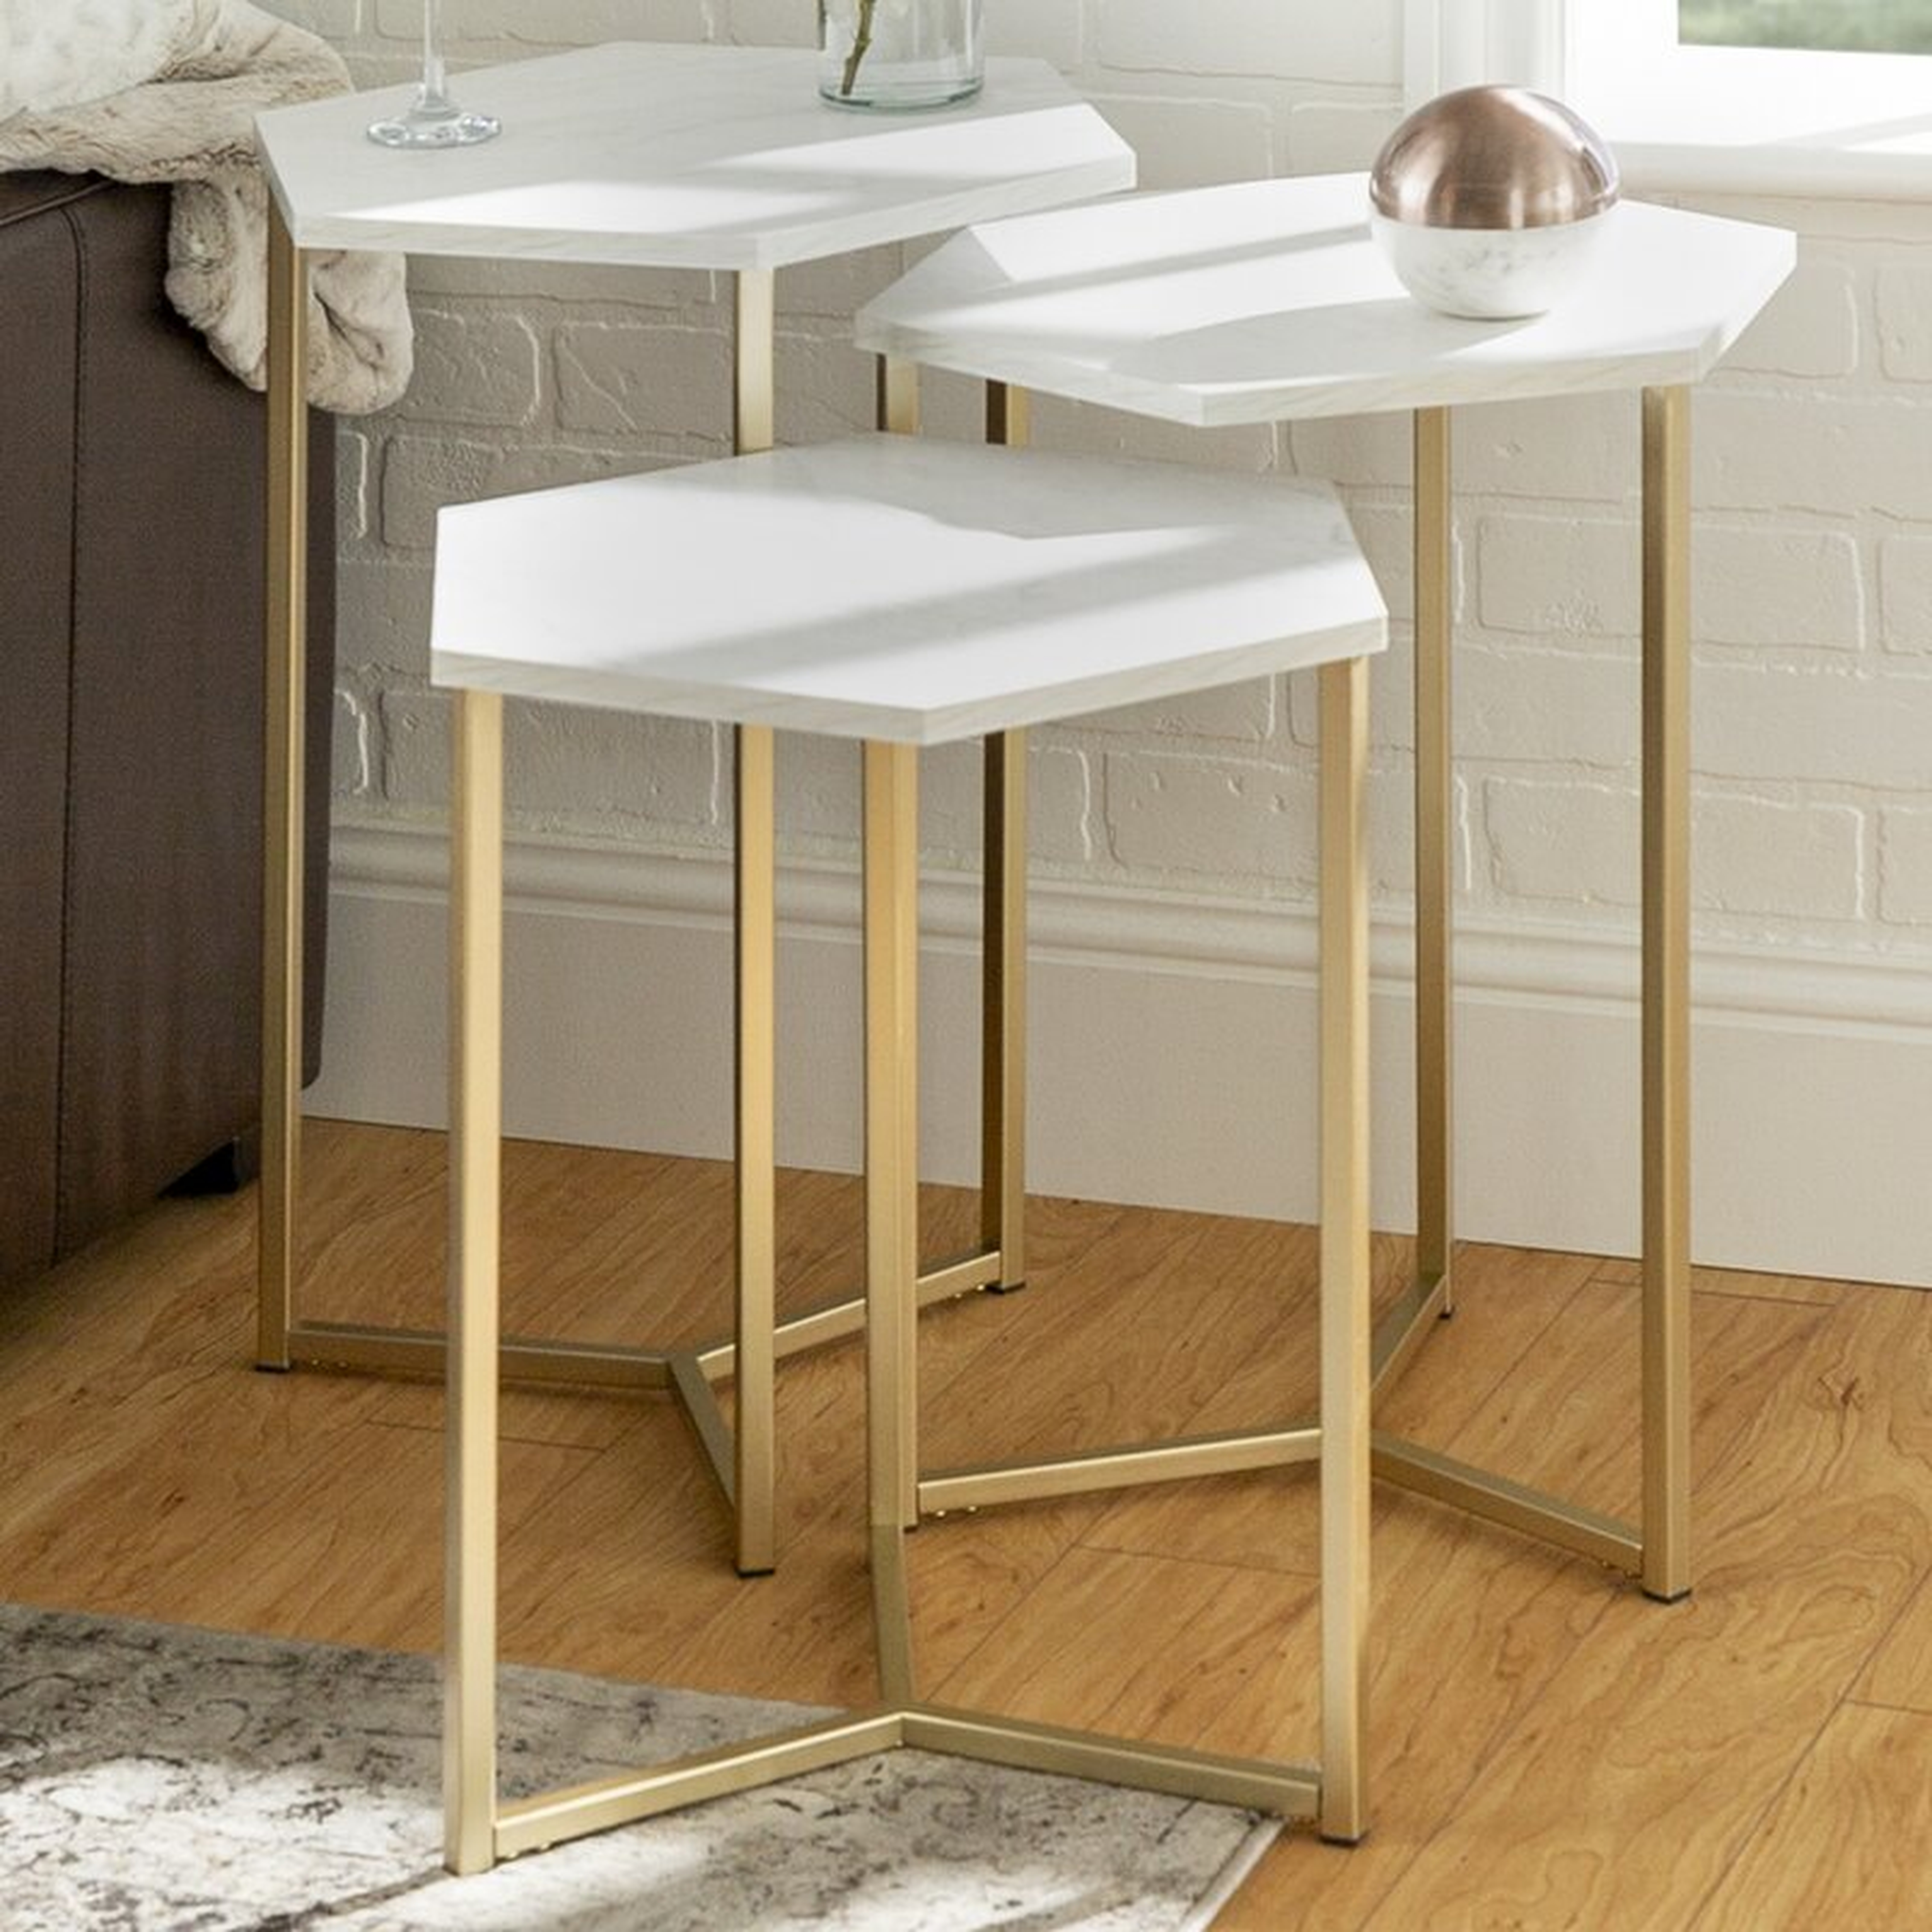 Labounty 3 Piece Nesting Tables (Back in Stock May 16, 2021) - Wayfair